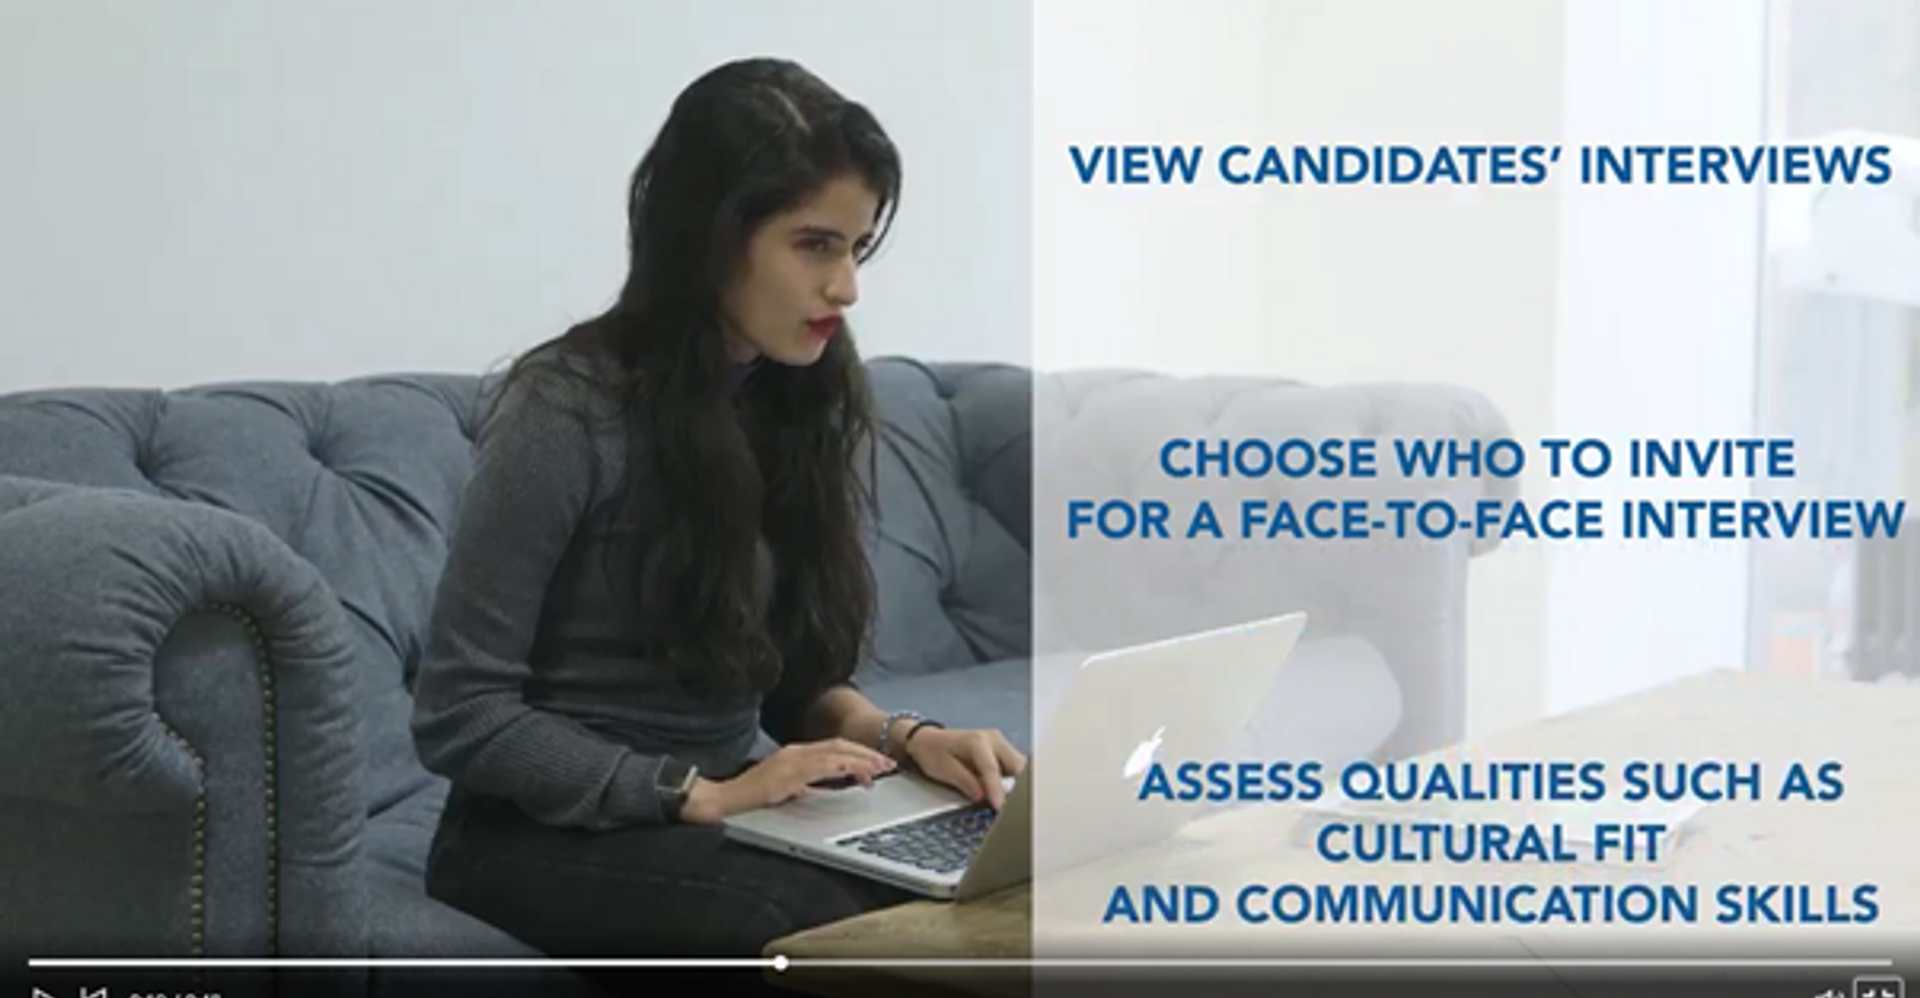 Next Phase's video-based recruitment technology can reduce the need for unneccesary first-stage interviews, enabling hiring managers to devote more time to the candidates who demonstrate the best "team fit".